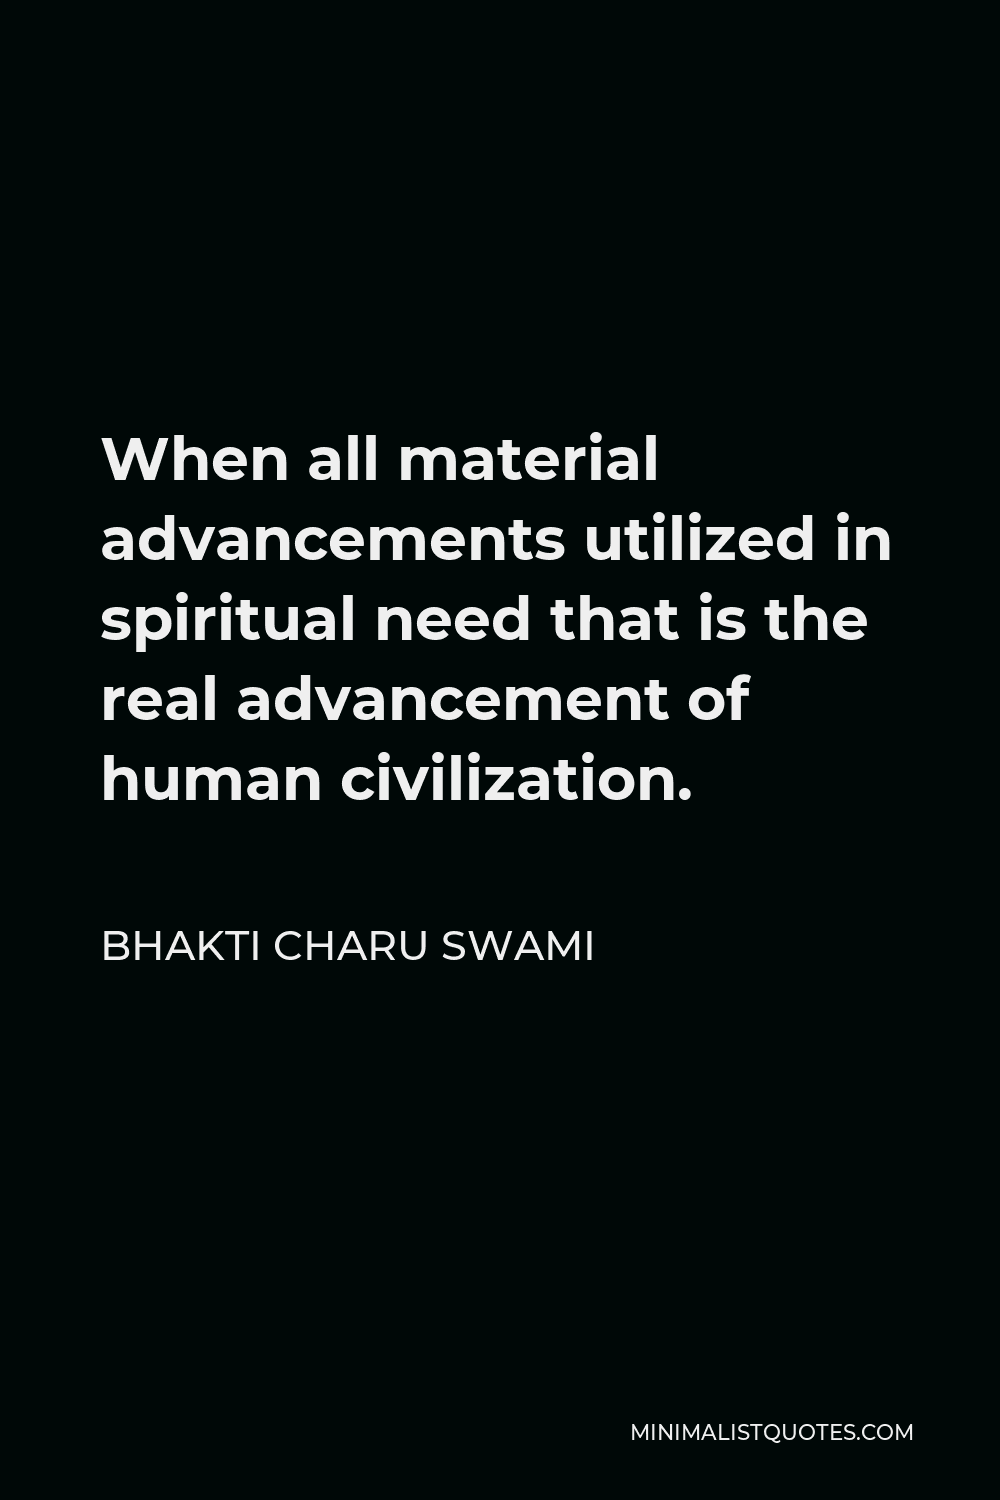 Bhakti Charu Swami Quote - When all material advancements utilized in spiritual need that is the real advancement of human civilization.